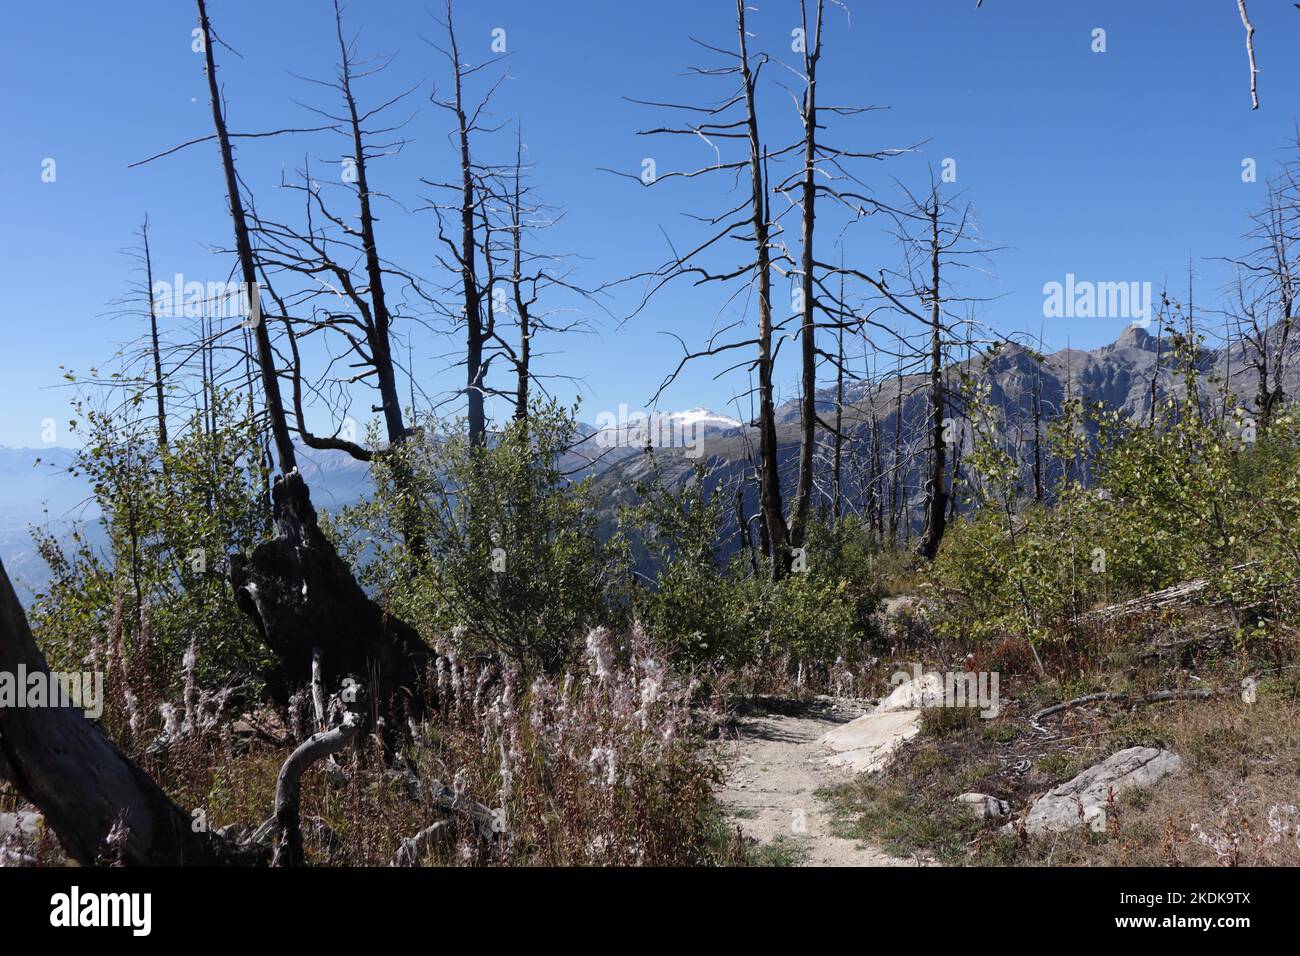 Charred trees after a wild fire in the Swiss alps. Leukerbad. Stock Photo